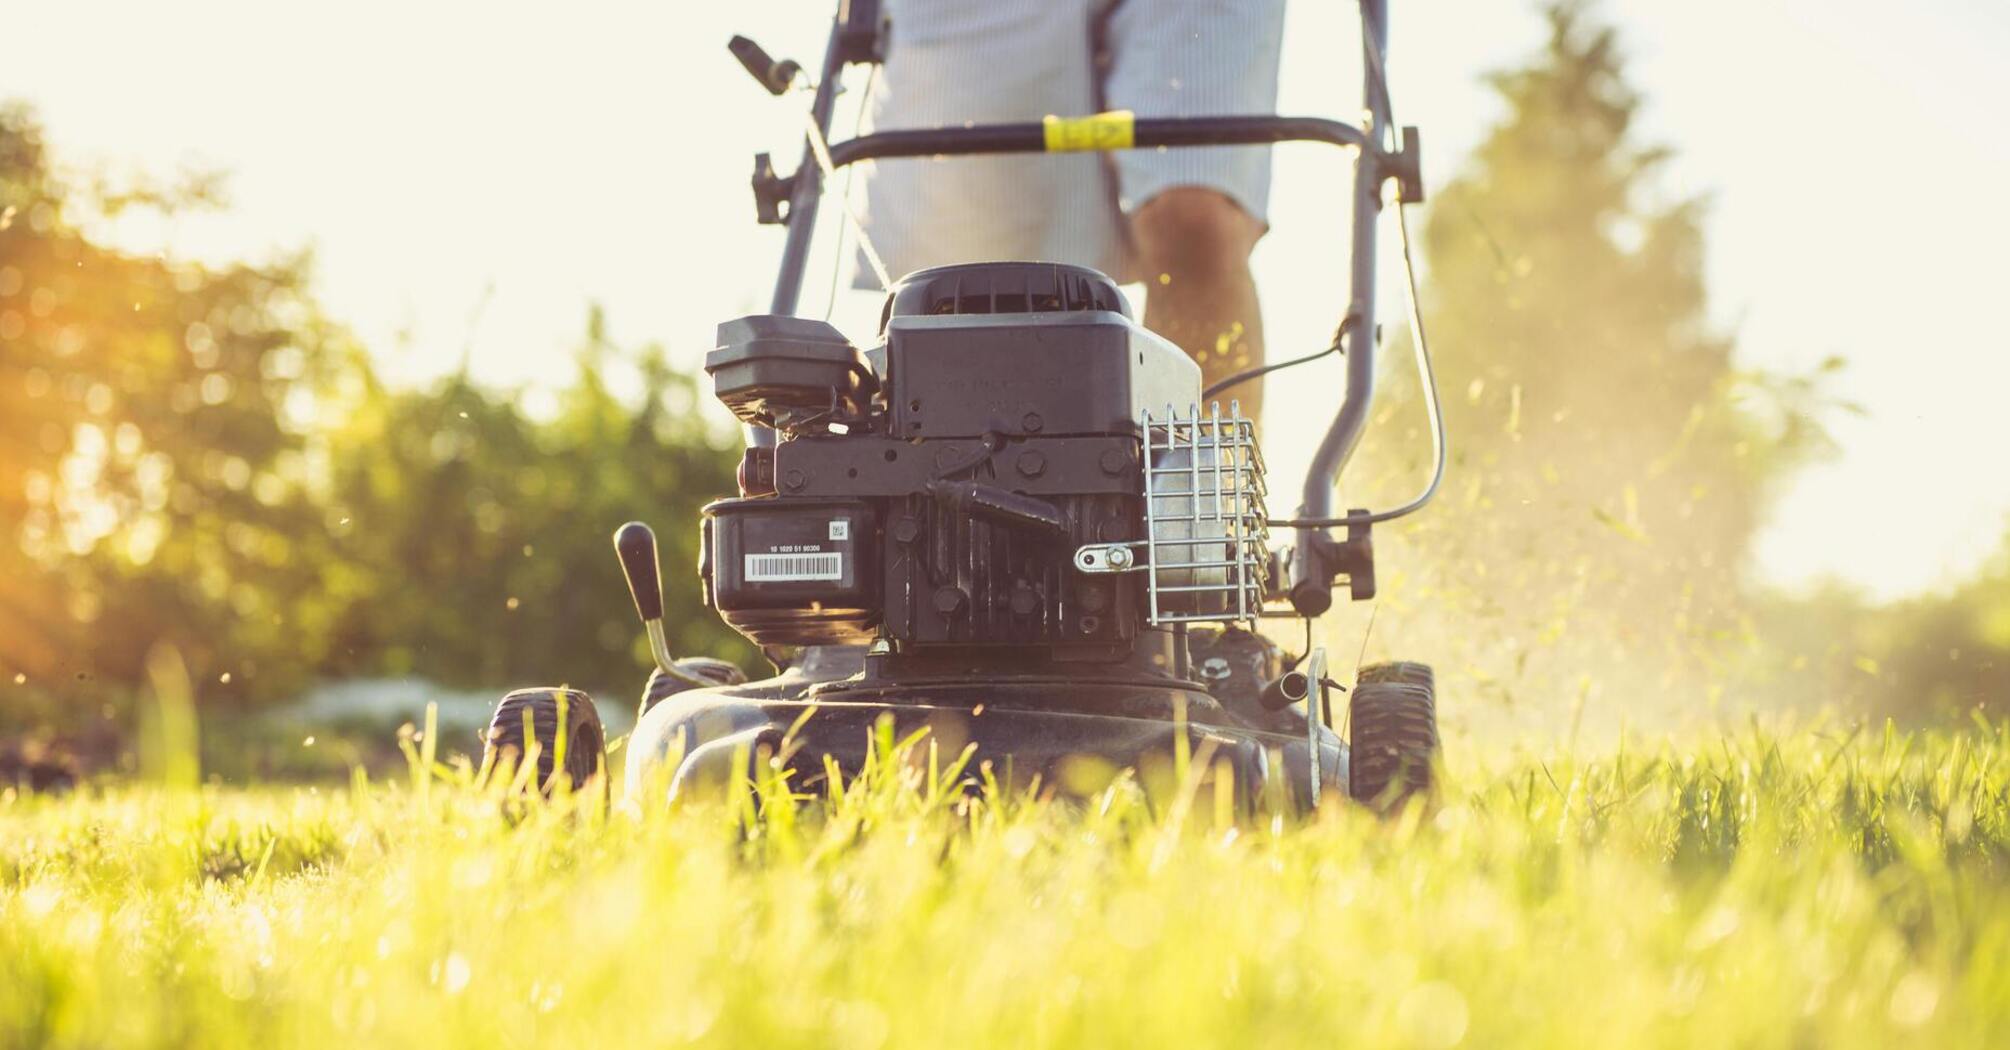 Comparison of electric and gasoline lawn mowers